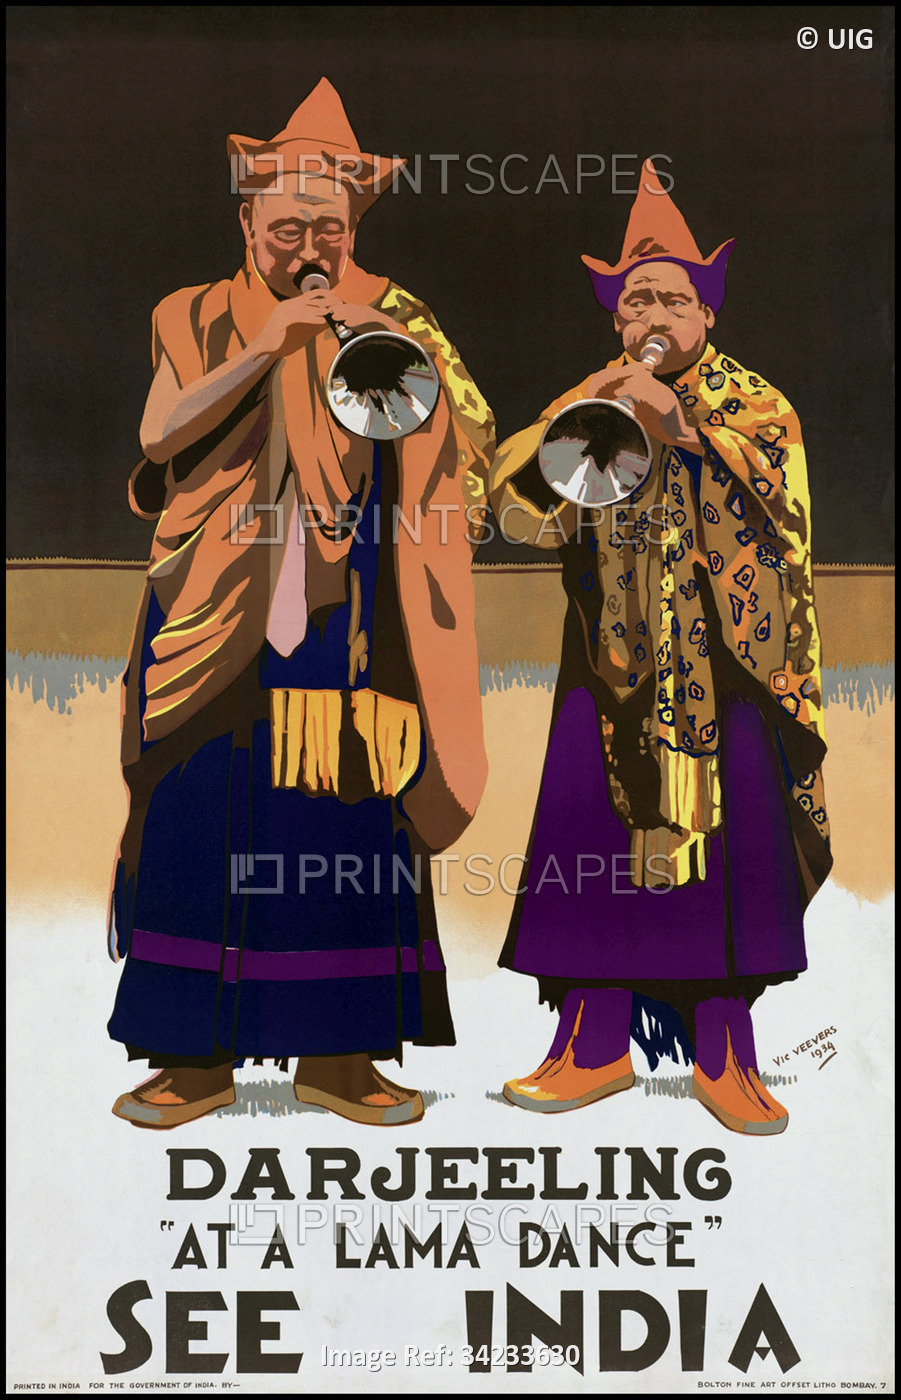 India: 'See India' Darjeeling - 'At a Lama Dance', vintage travel poster, Government of India. Victo